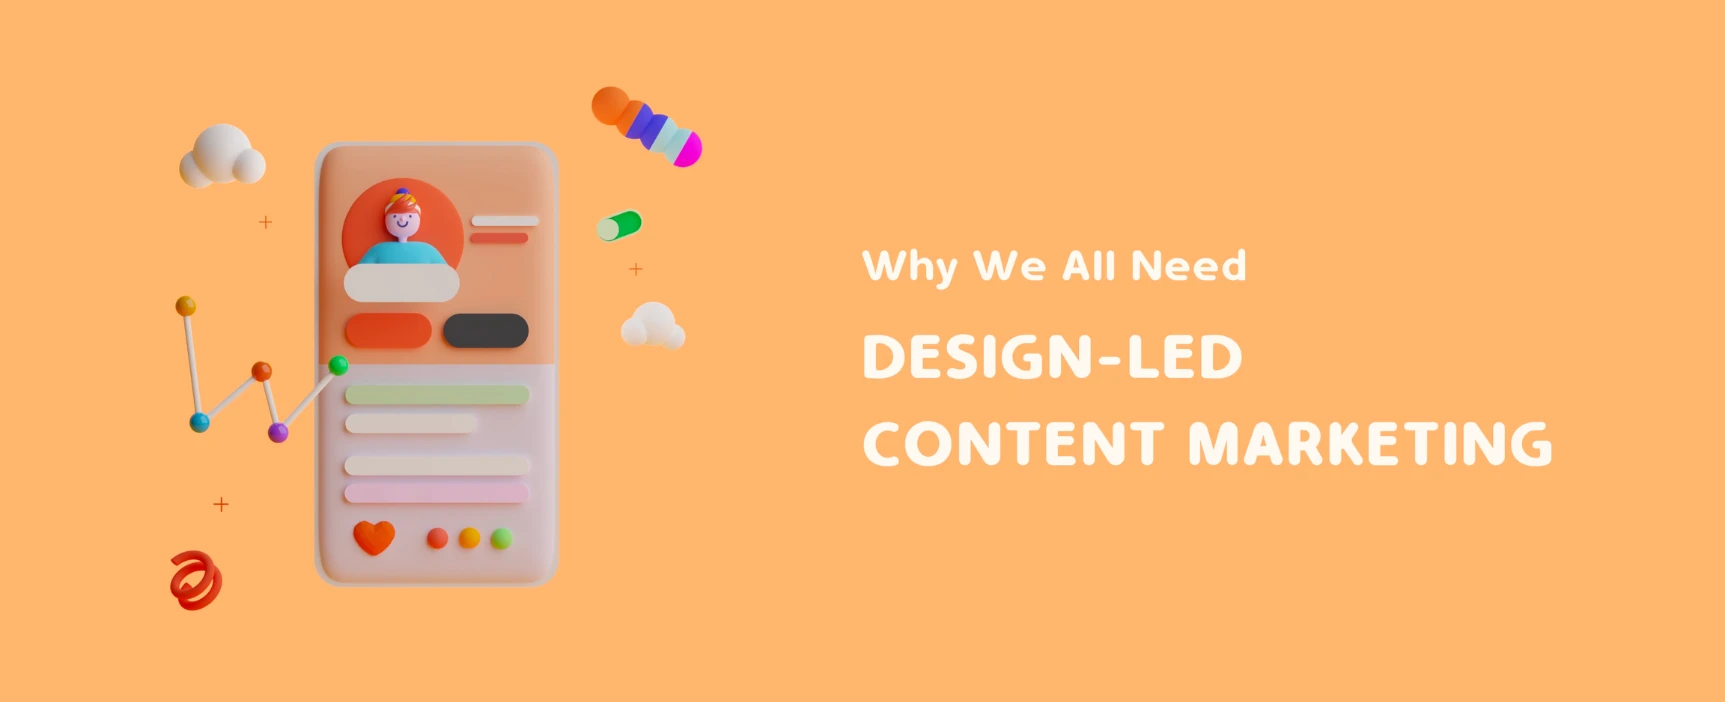 Why We All Need Design-led Content Marketing